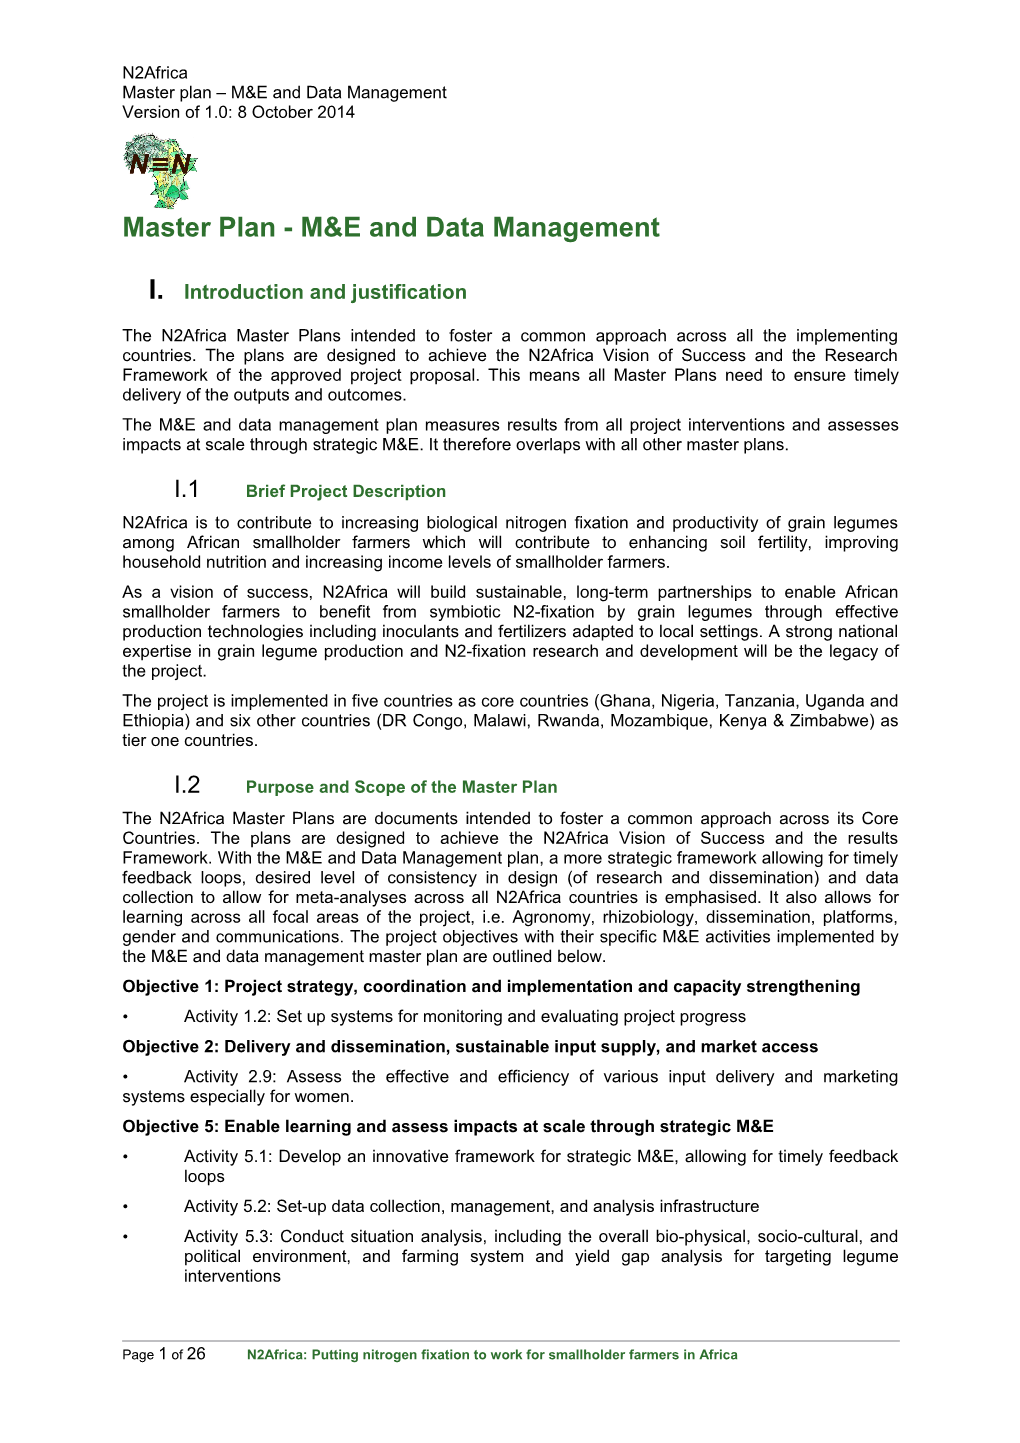 Master Plan - M&E and Data Management